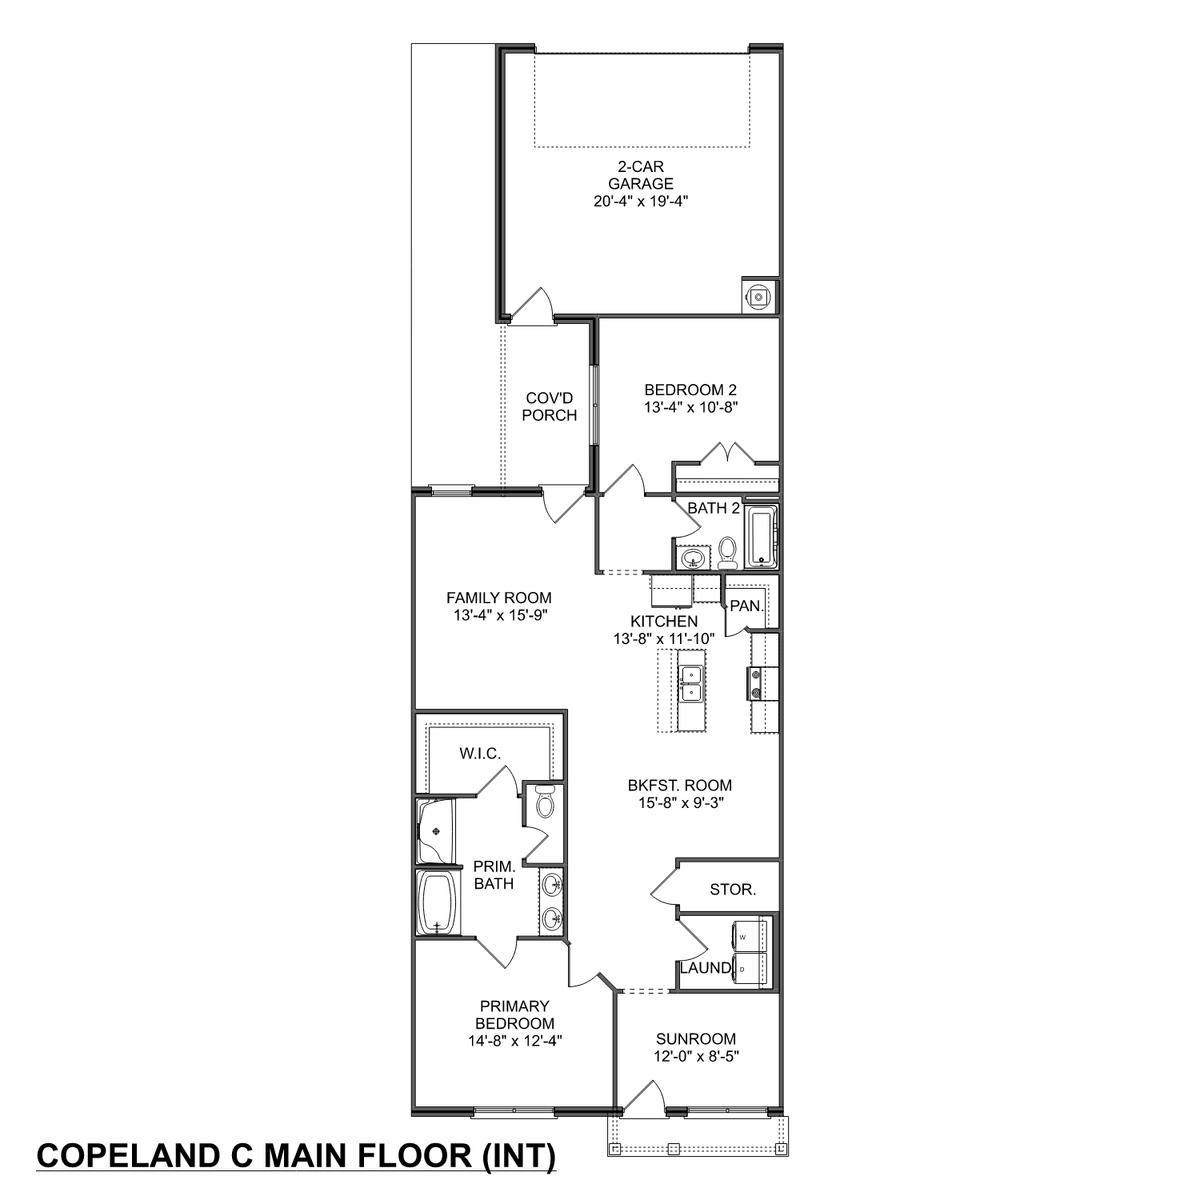 1 - The Copeland C floor plan layout for 106 Atkinson Alley in Davidson Homes' Barnett's Crossing community.